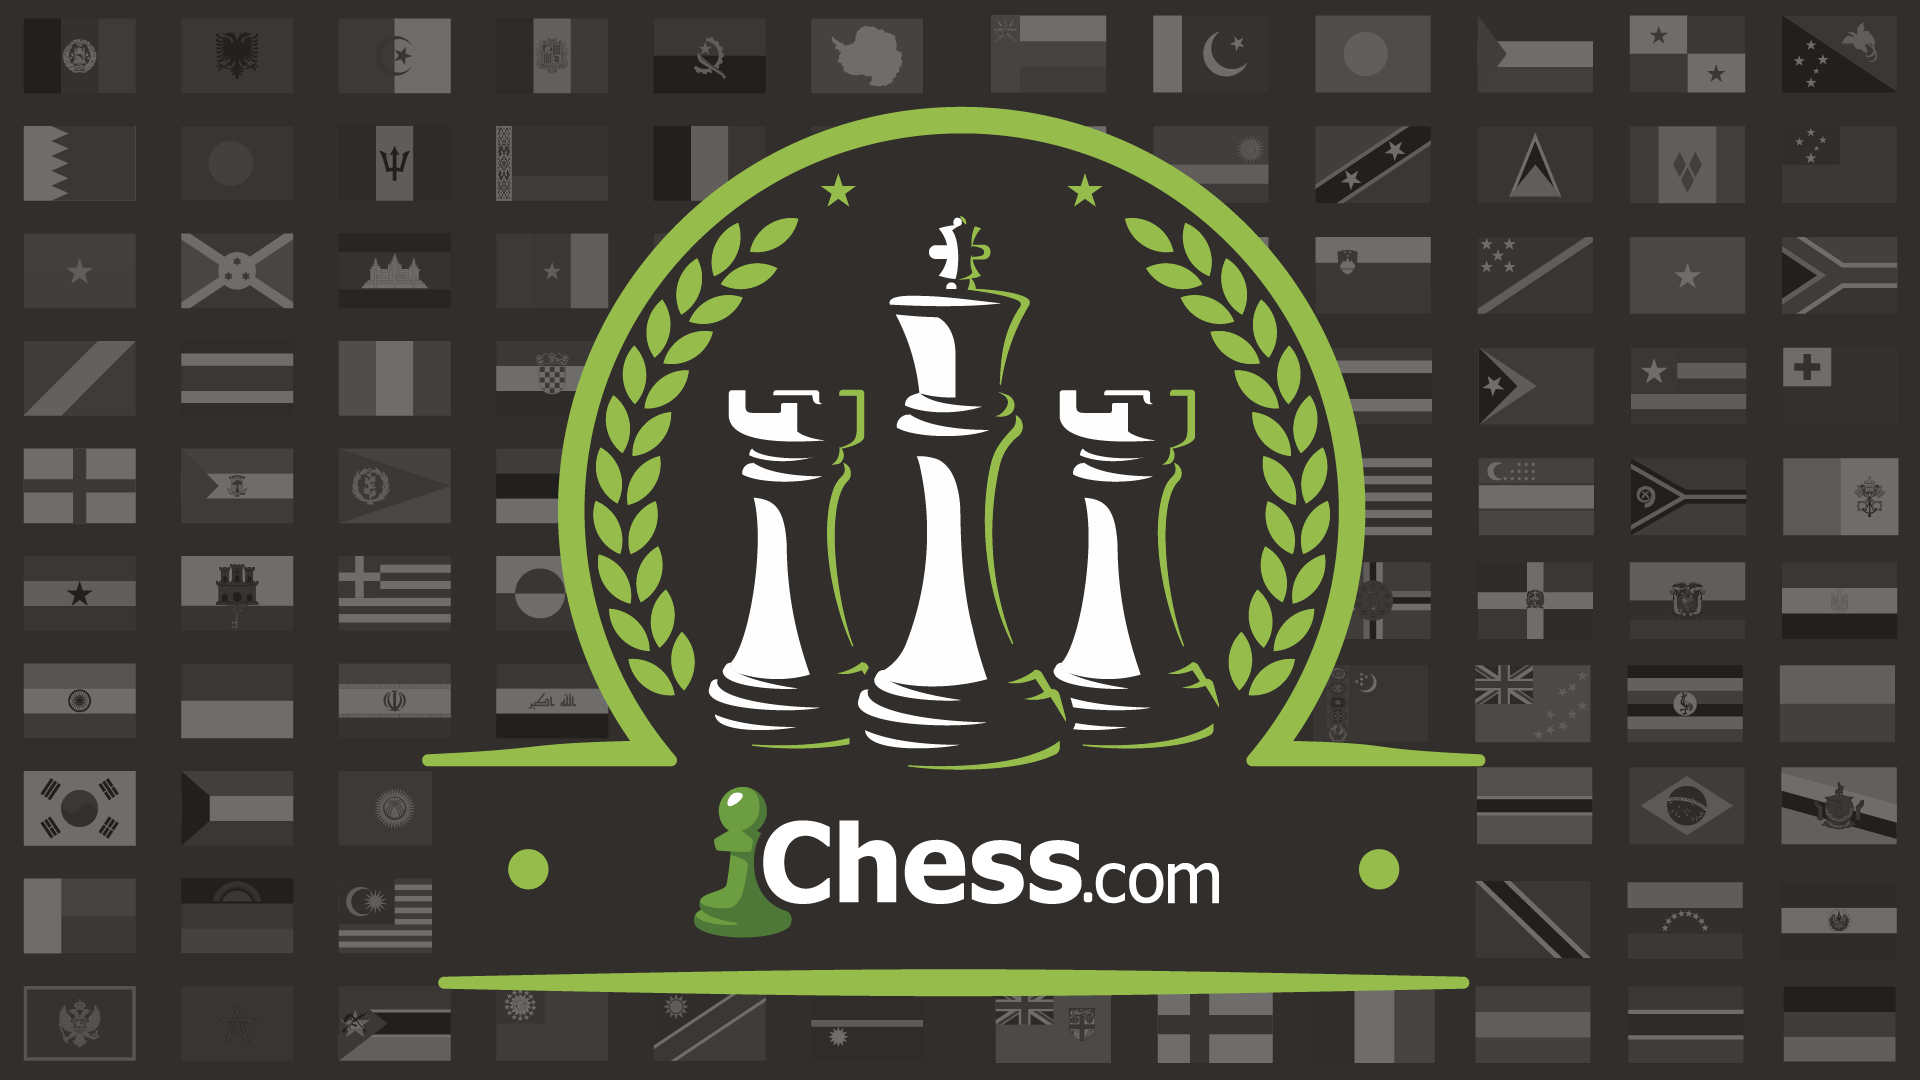 Chess.com reports problems with servers due to massive influx of users